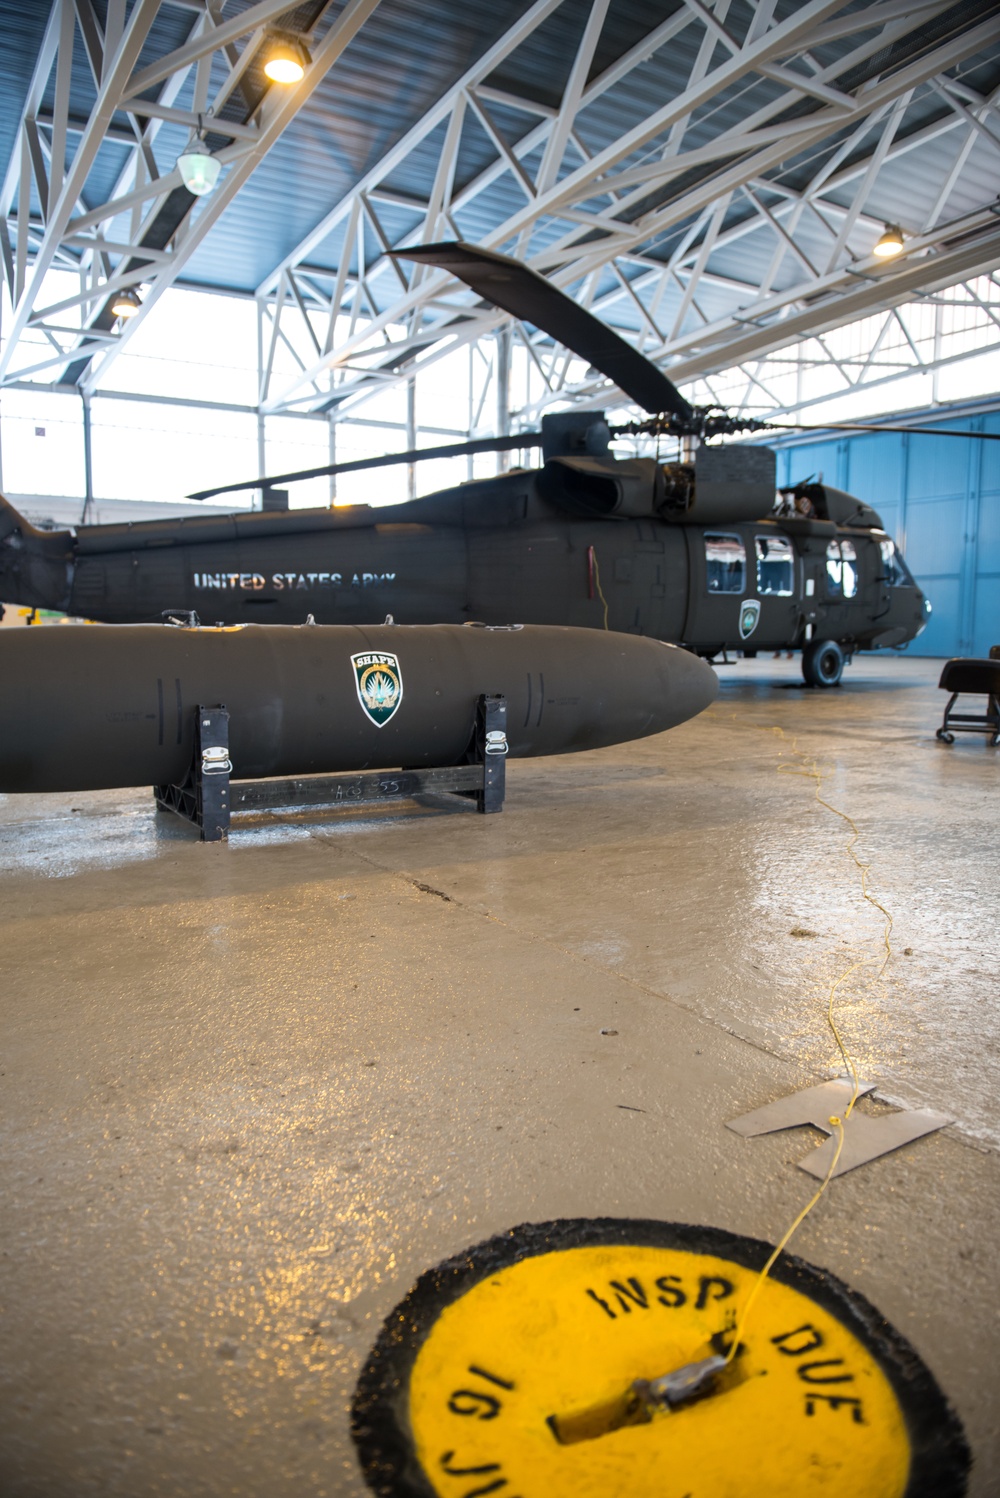 Views of a UH-60A Black Hawk helicopter